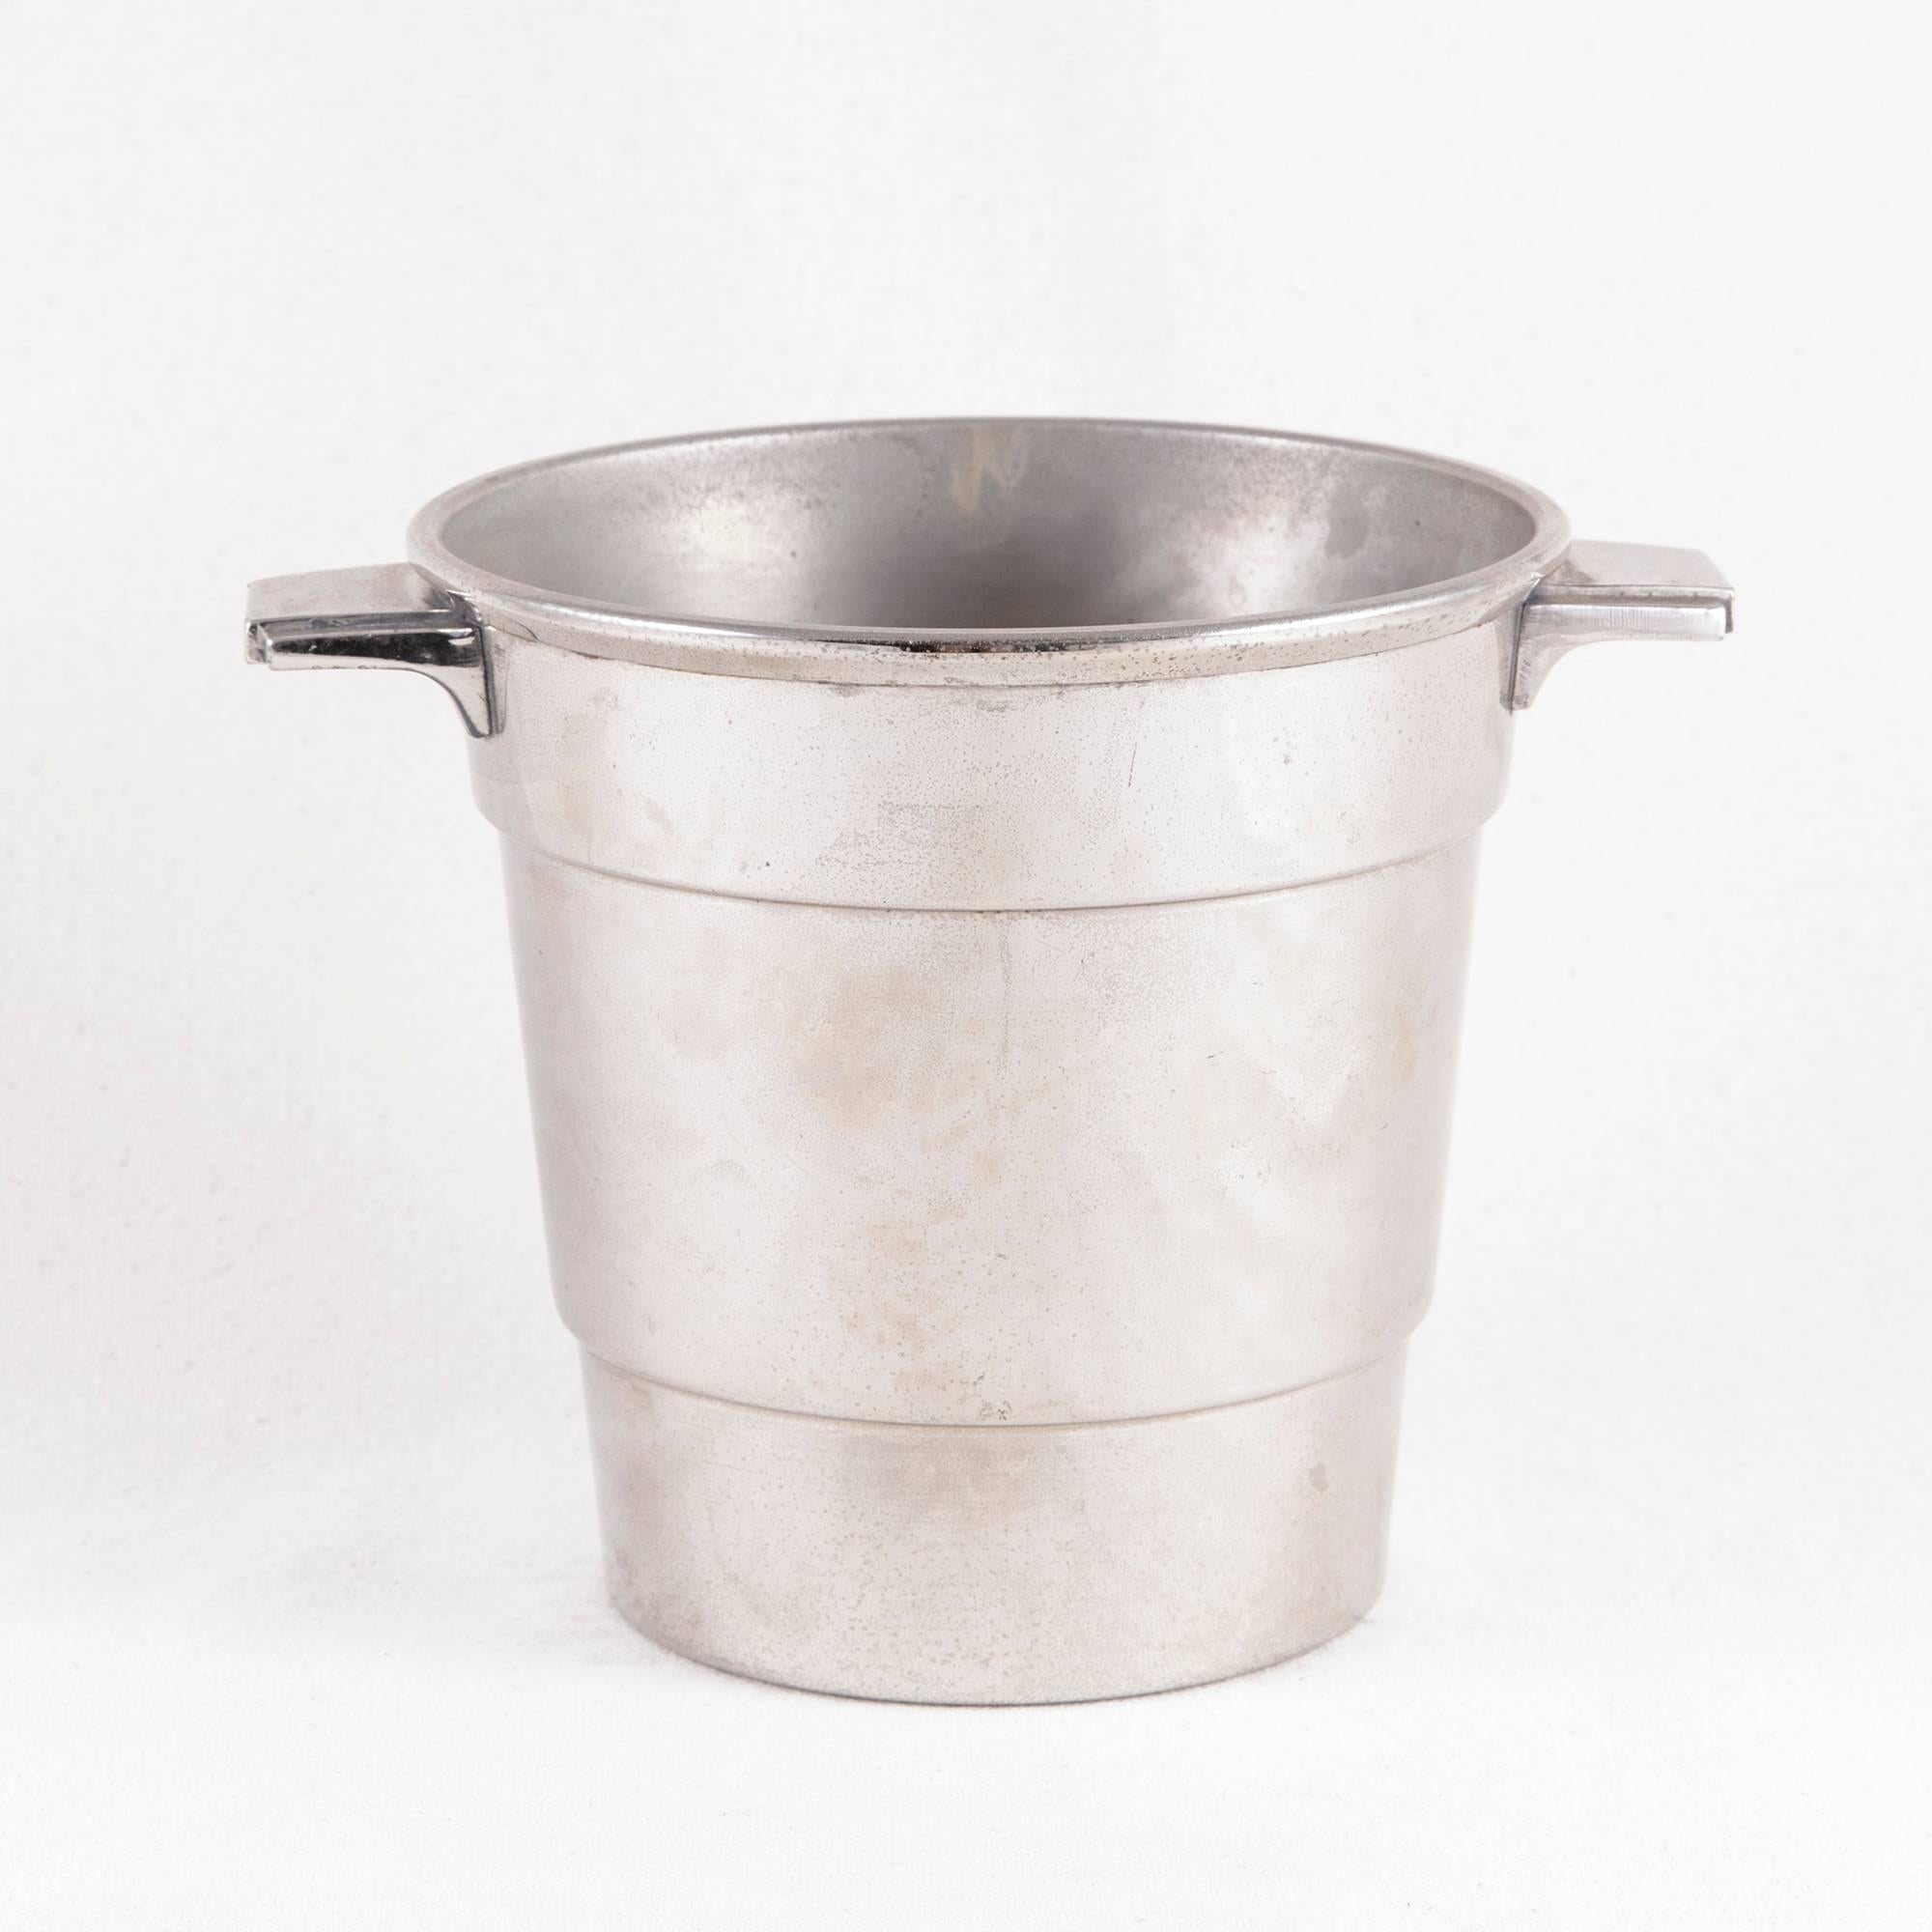 Mid-20th Century French Art Deco Period Small-Scale Silver Plate Moet et Chandon Champagne Bucket